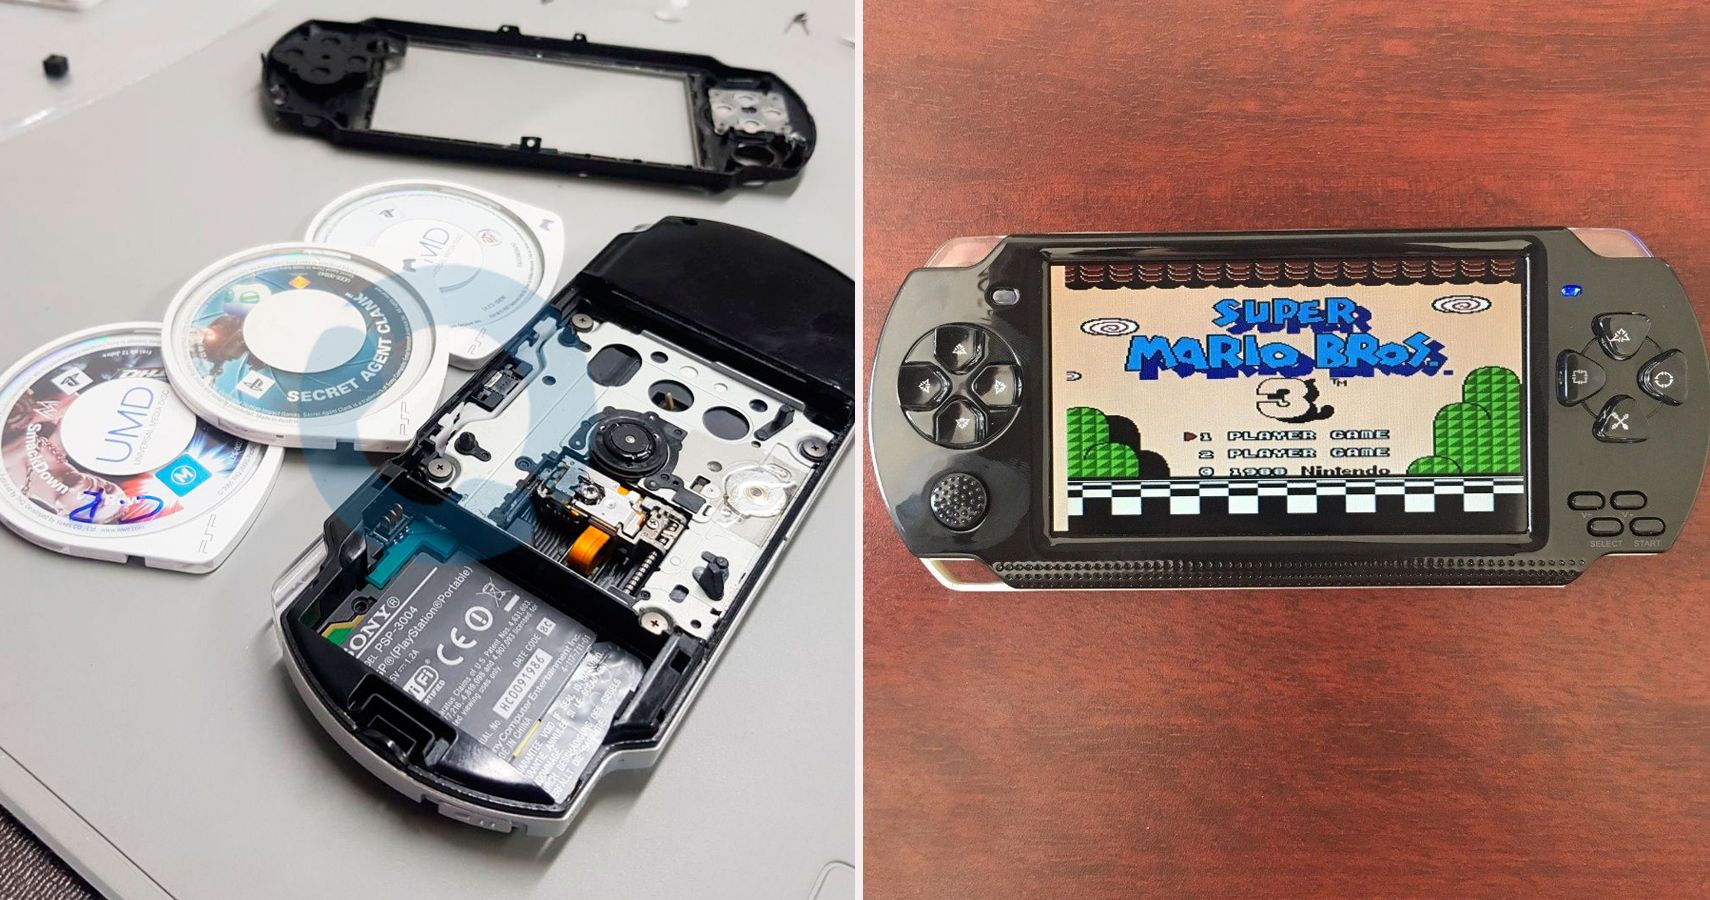 22 About The PlayStation Portable Only True Fans Know